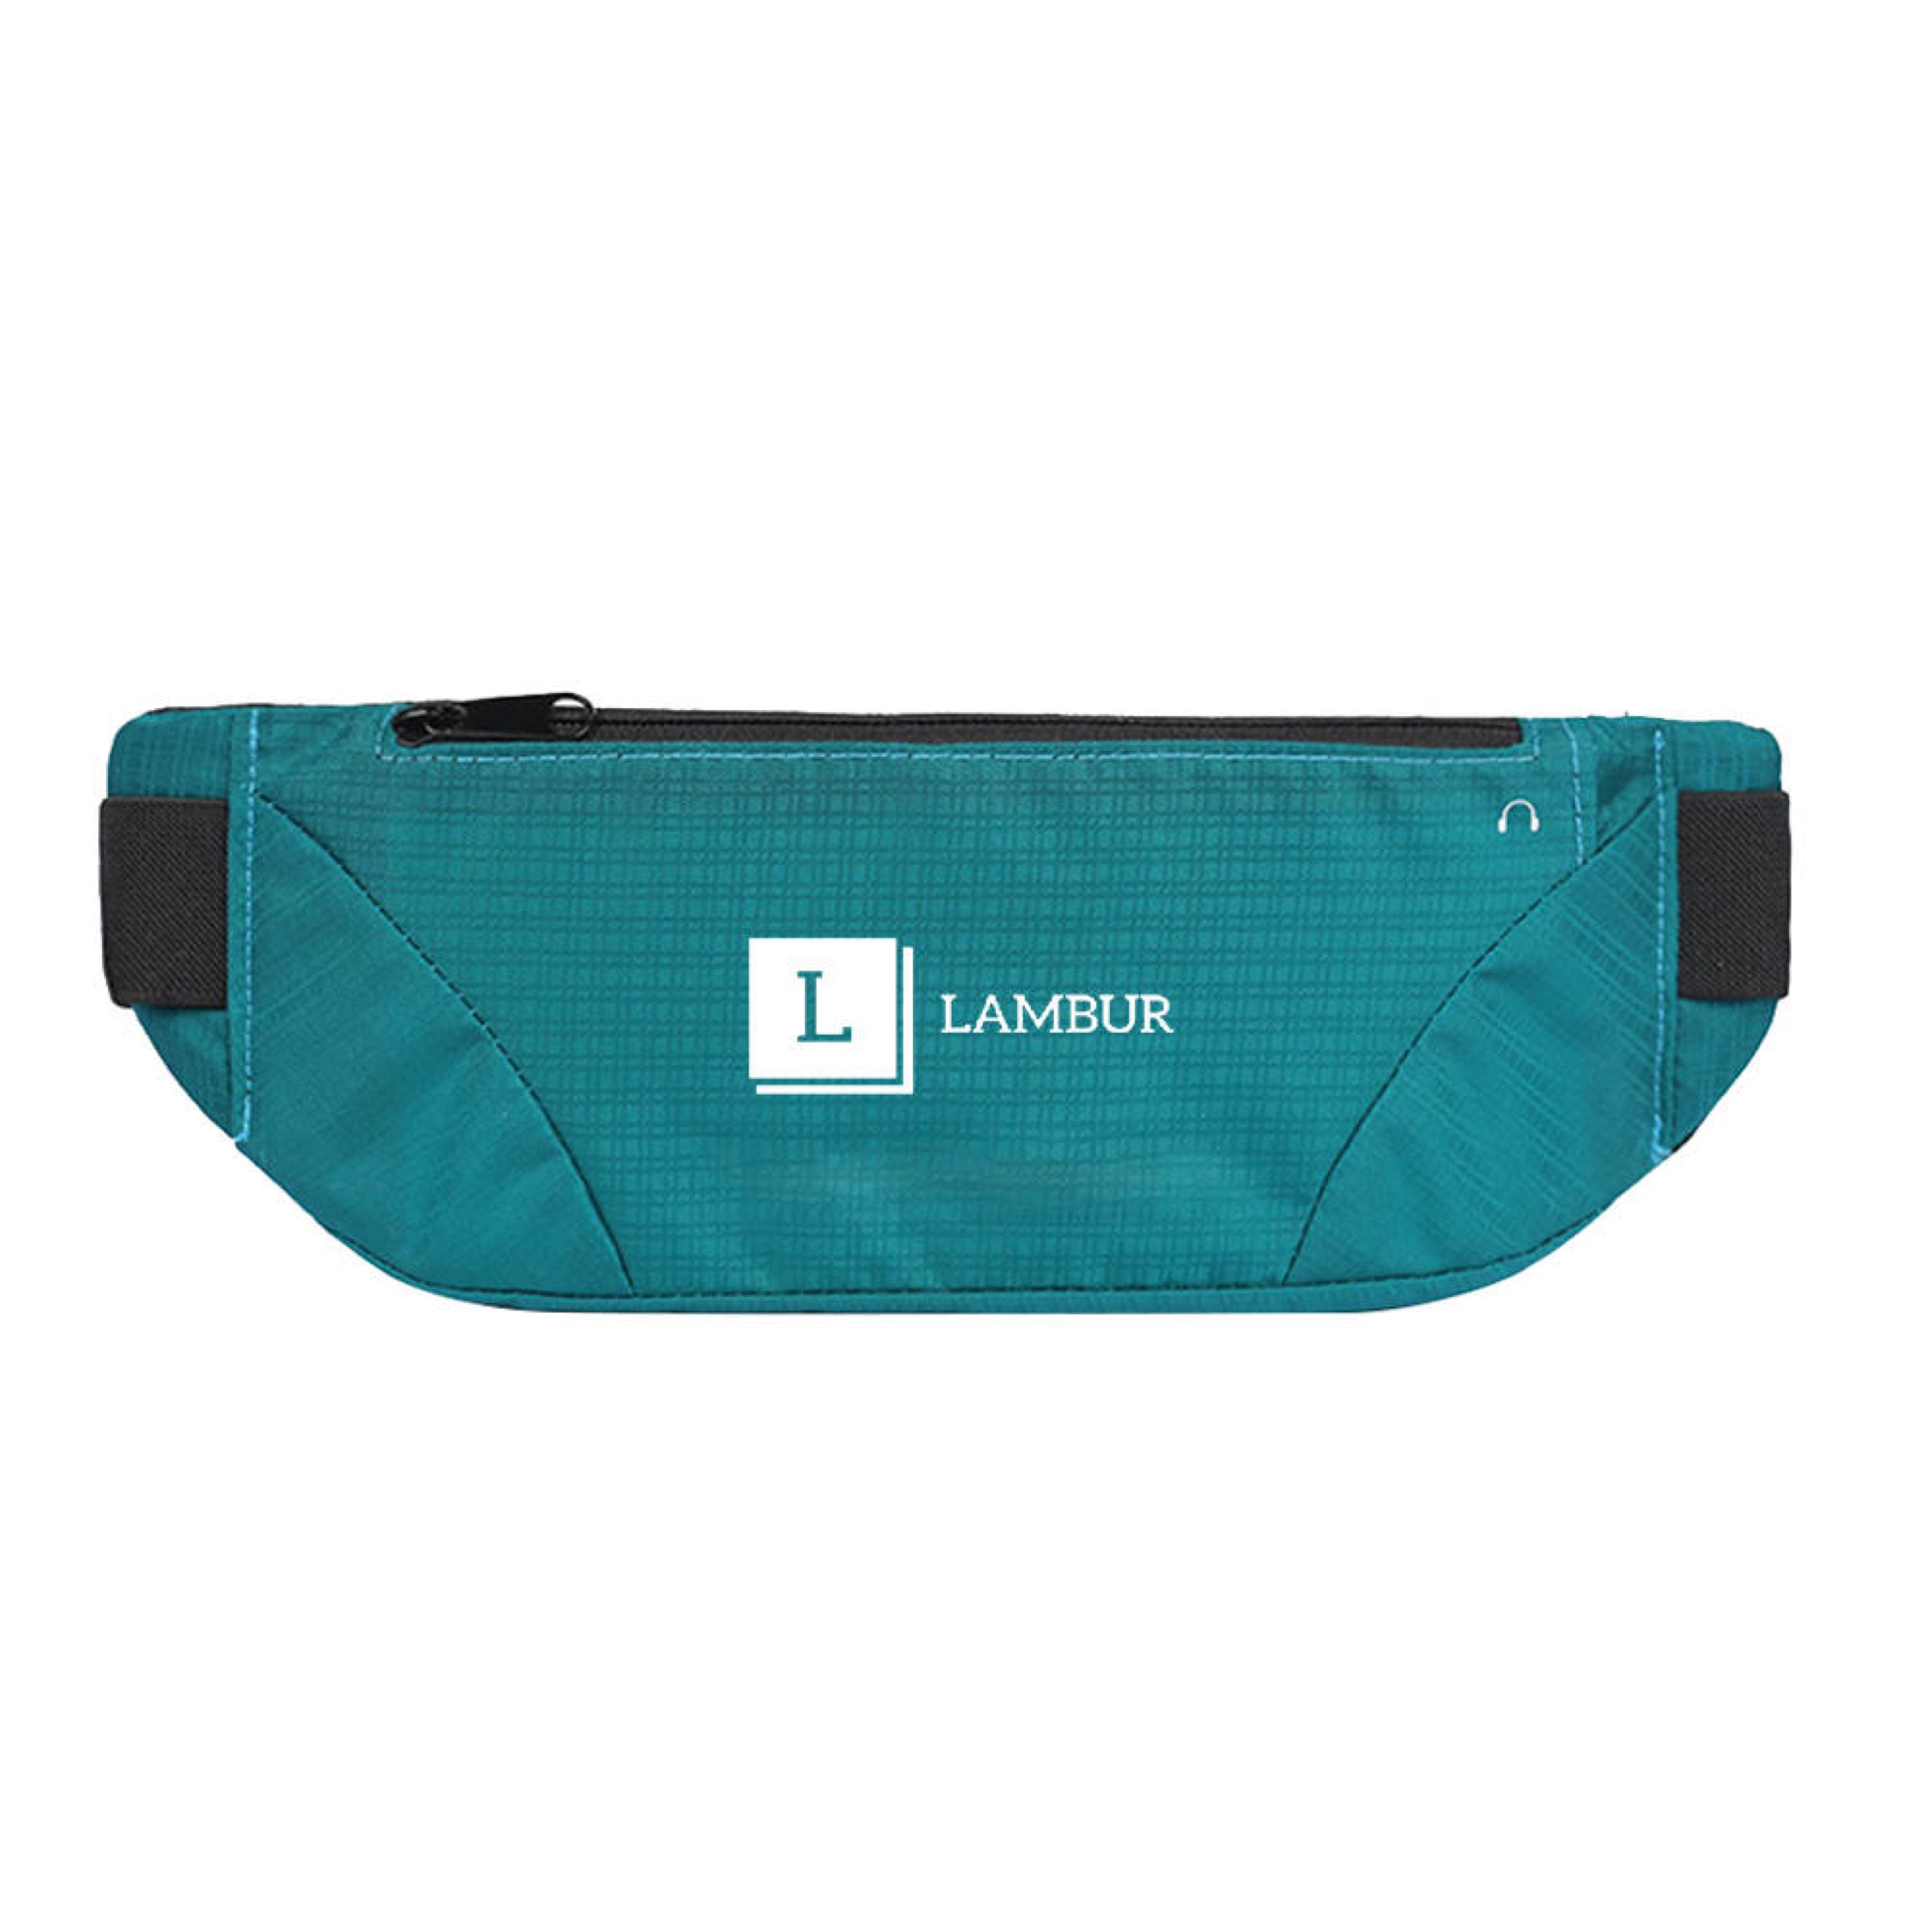 "Stylish and practical waist bag perfect for hands-free convenience. Ideal for urban adventures, travel, or daily commutes. Sleek design with ample storage compartments. A must-have accessory for the fashion-forward and on-the-go individuals!"